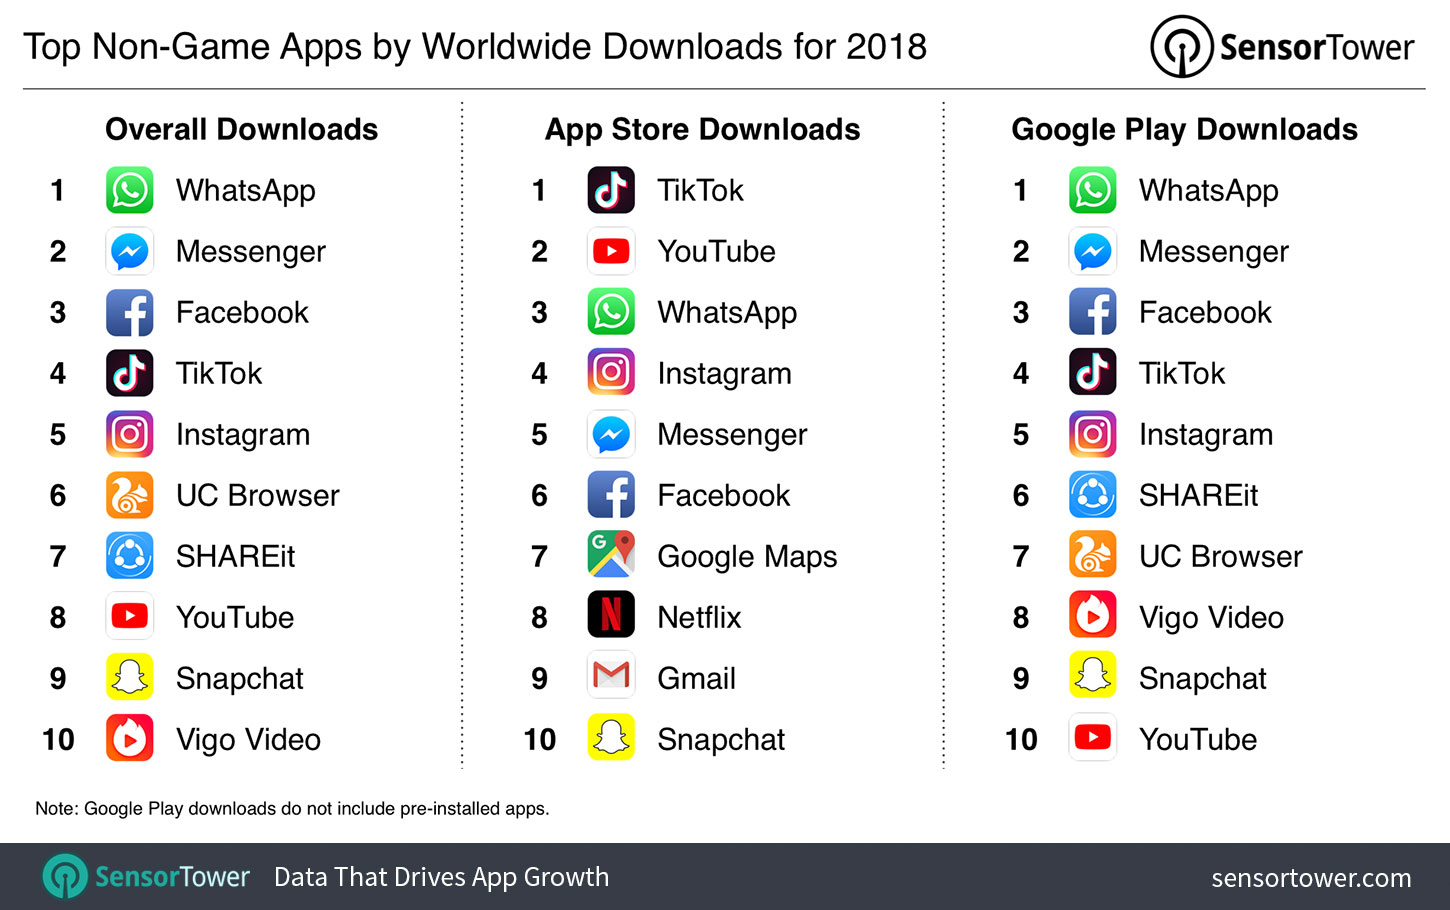 Chart showing the world's most downloaded iOS and Google Play apps for 2018